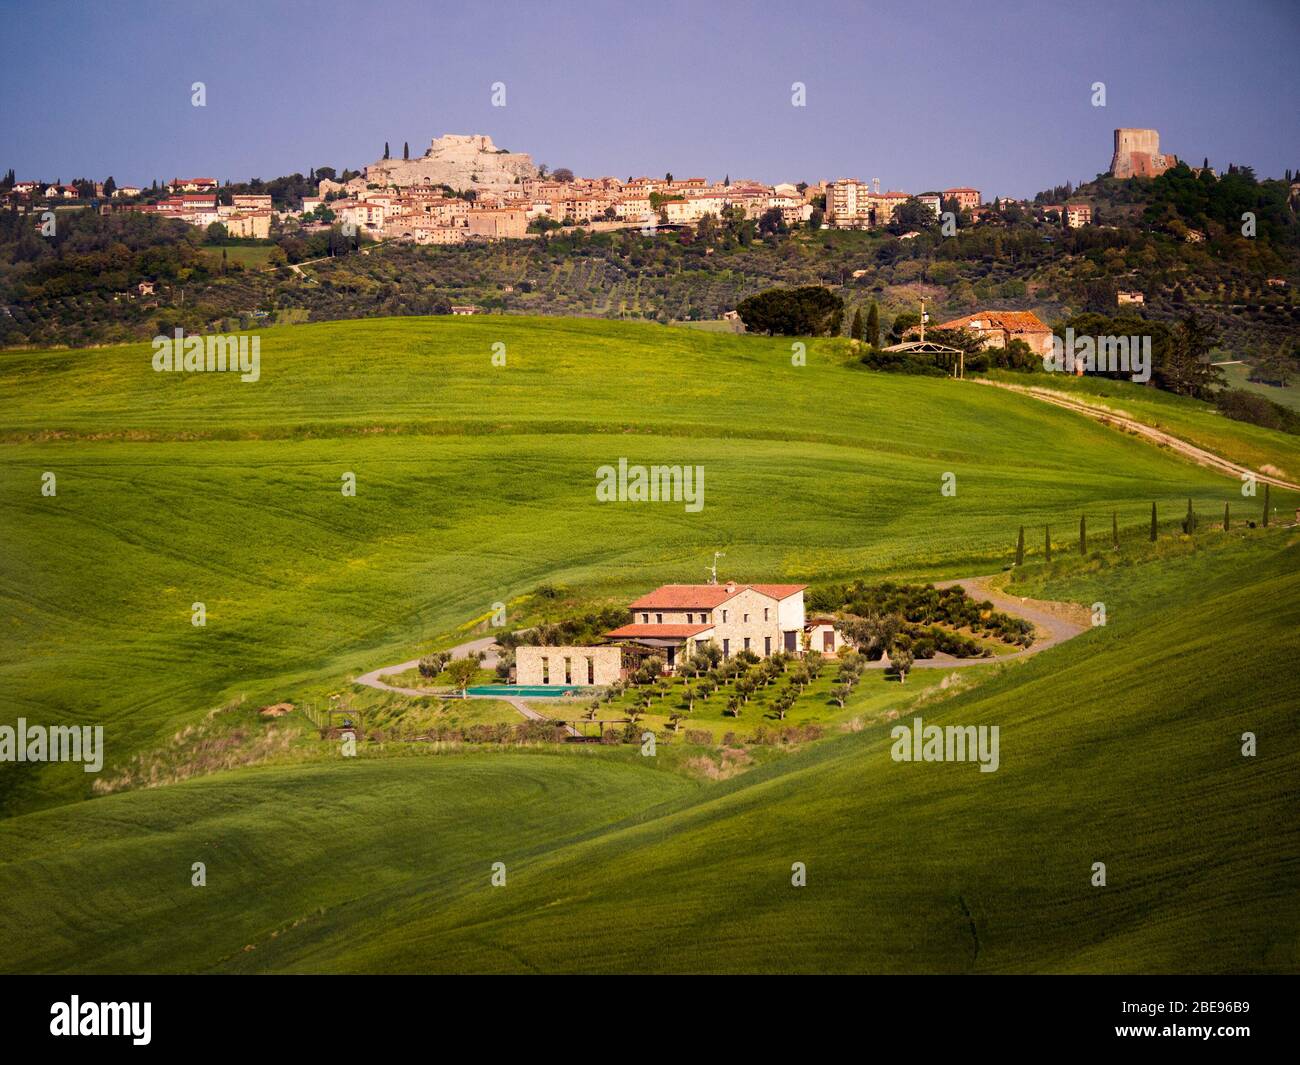 Hilly Tuscan landscape in spring. Green winding hills with scattered houses. Stock Photo